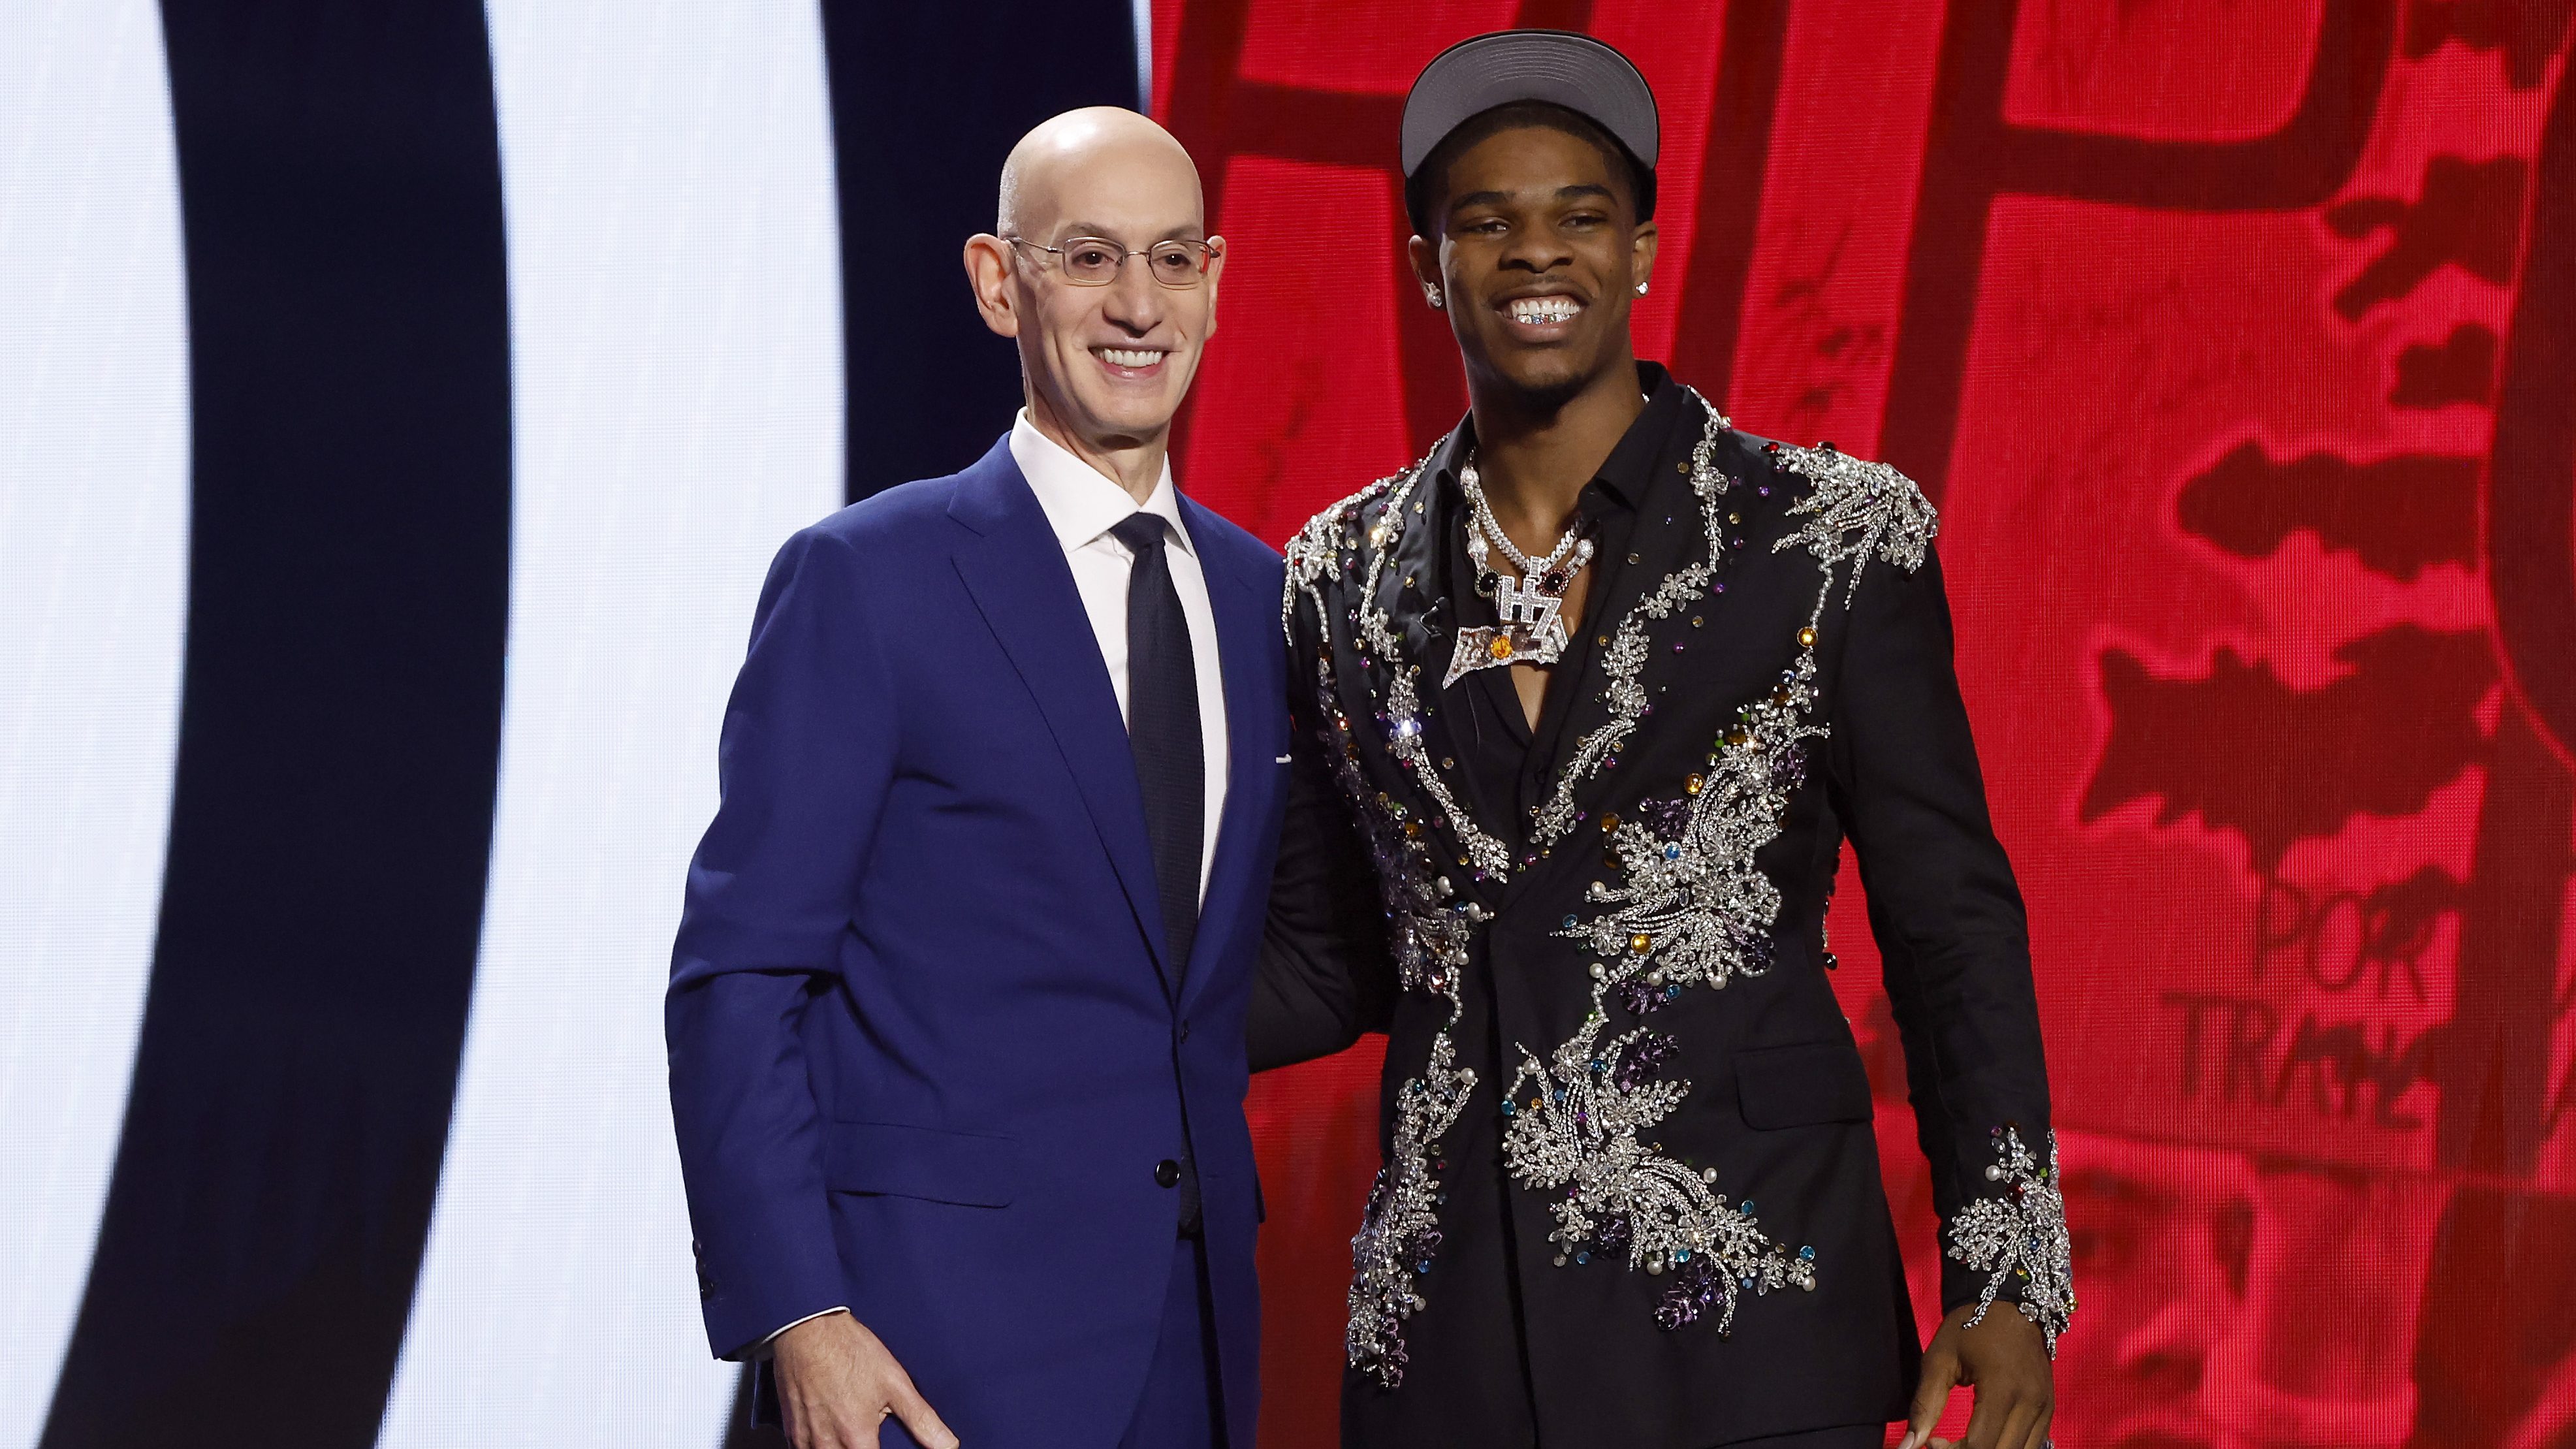 NBA Draft picks 2023: Complete results, list of selections from Rounds 1-2